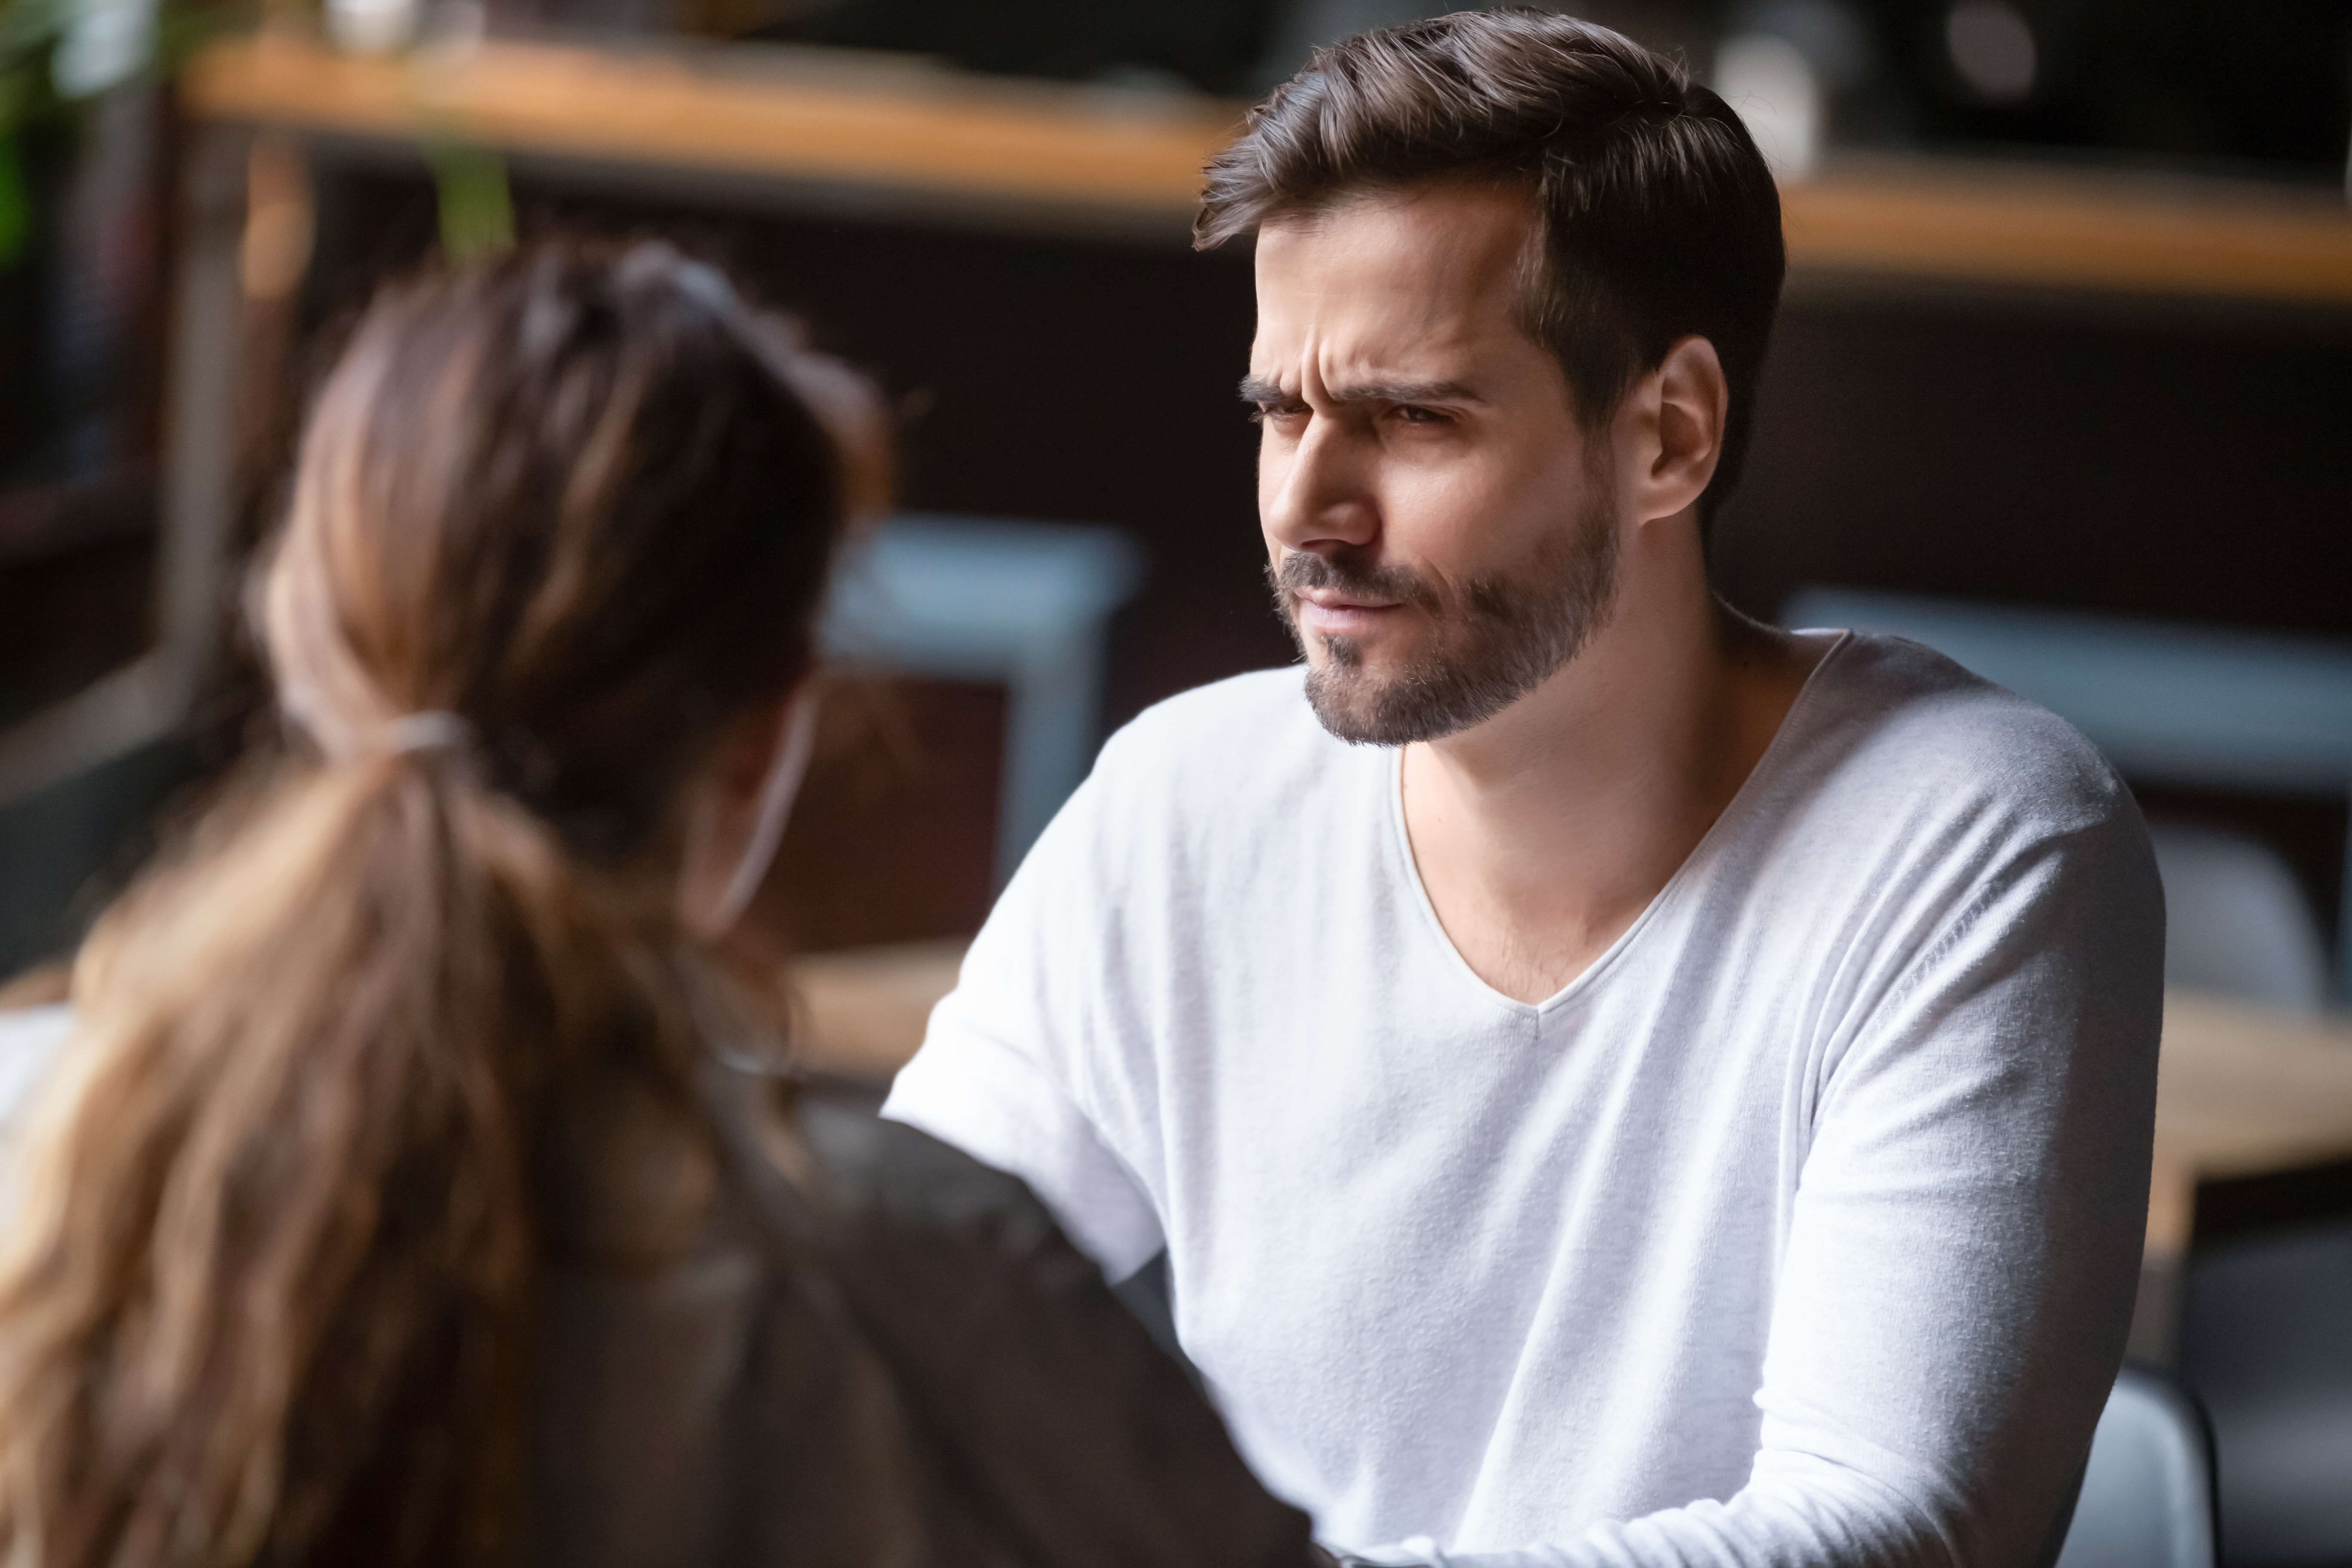 A man with a doubtful look while talking to a woman | Source: Shutterstock